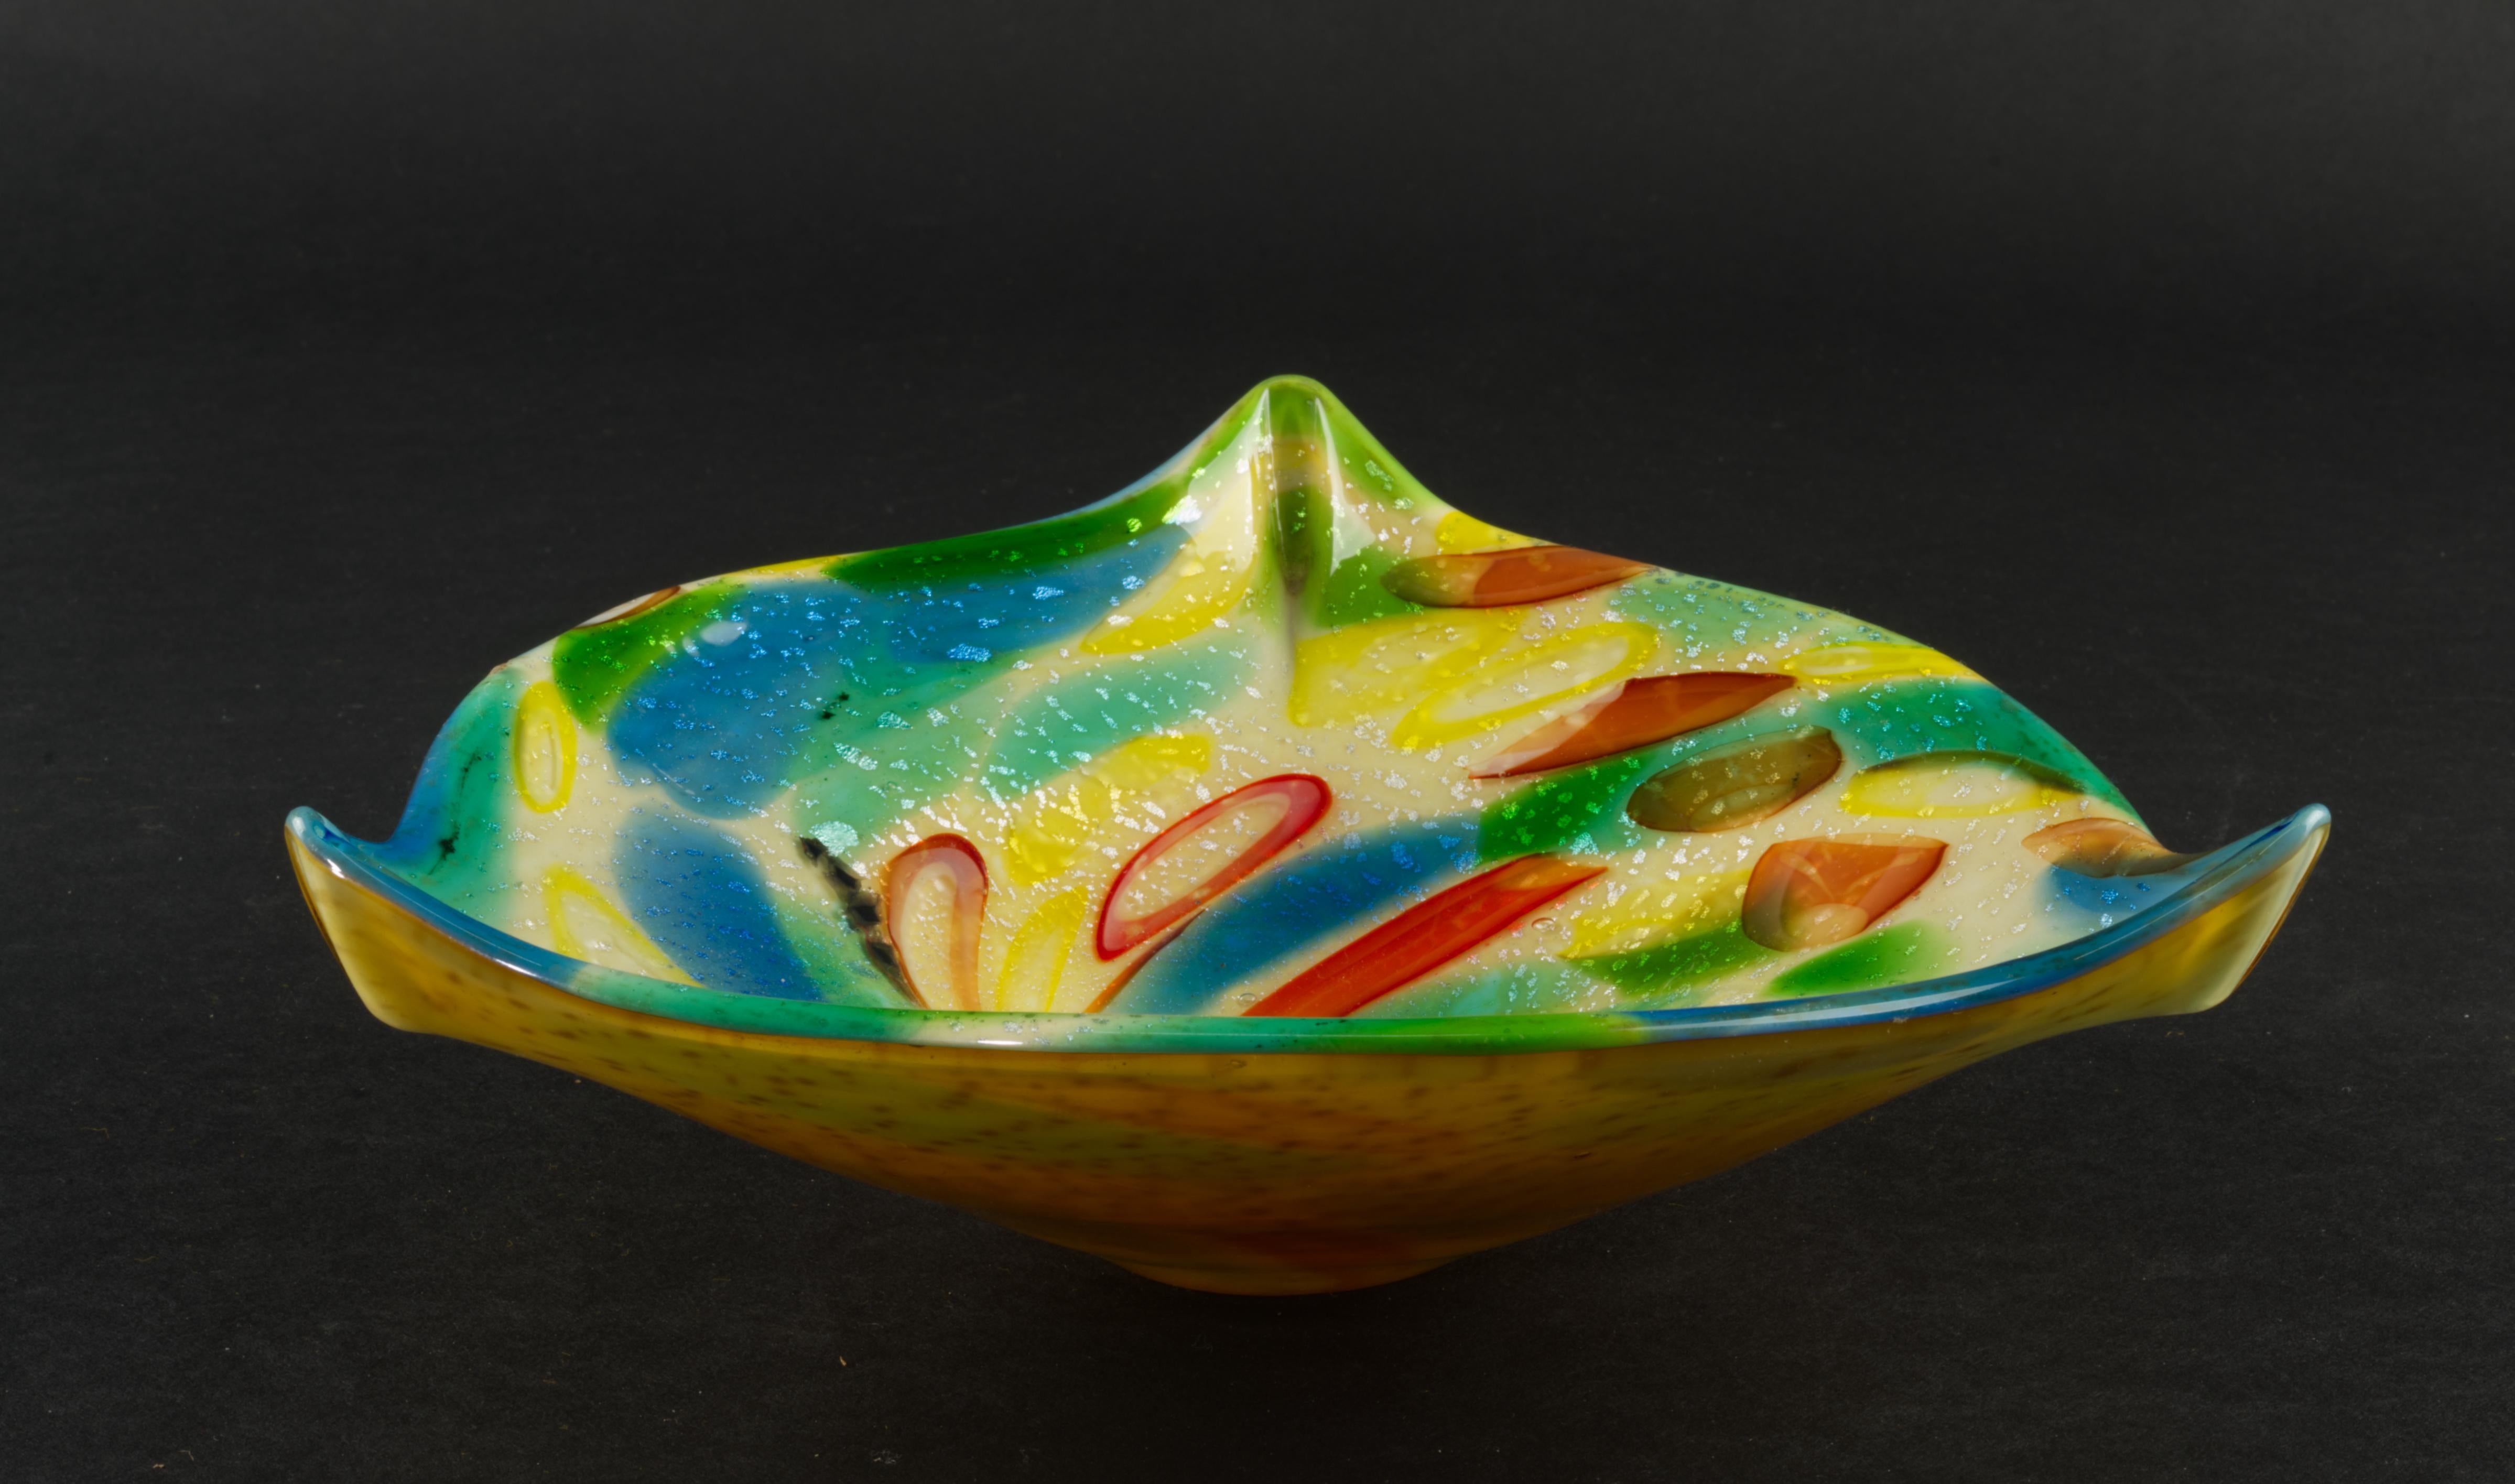 
Murano glass free-form bowl or ashtray with 3-way crimped rim was made in 1950s in Italy by AVEM (Arte Vetraria Muranese). It has typical tutti frutti poly-chrome interior with mixture of murine in colorful swirls and silver leaf inclusions and